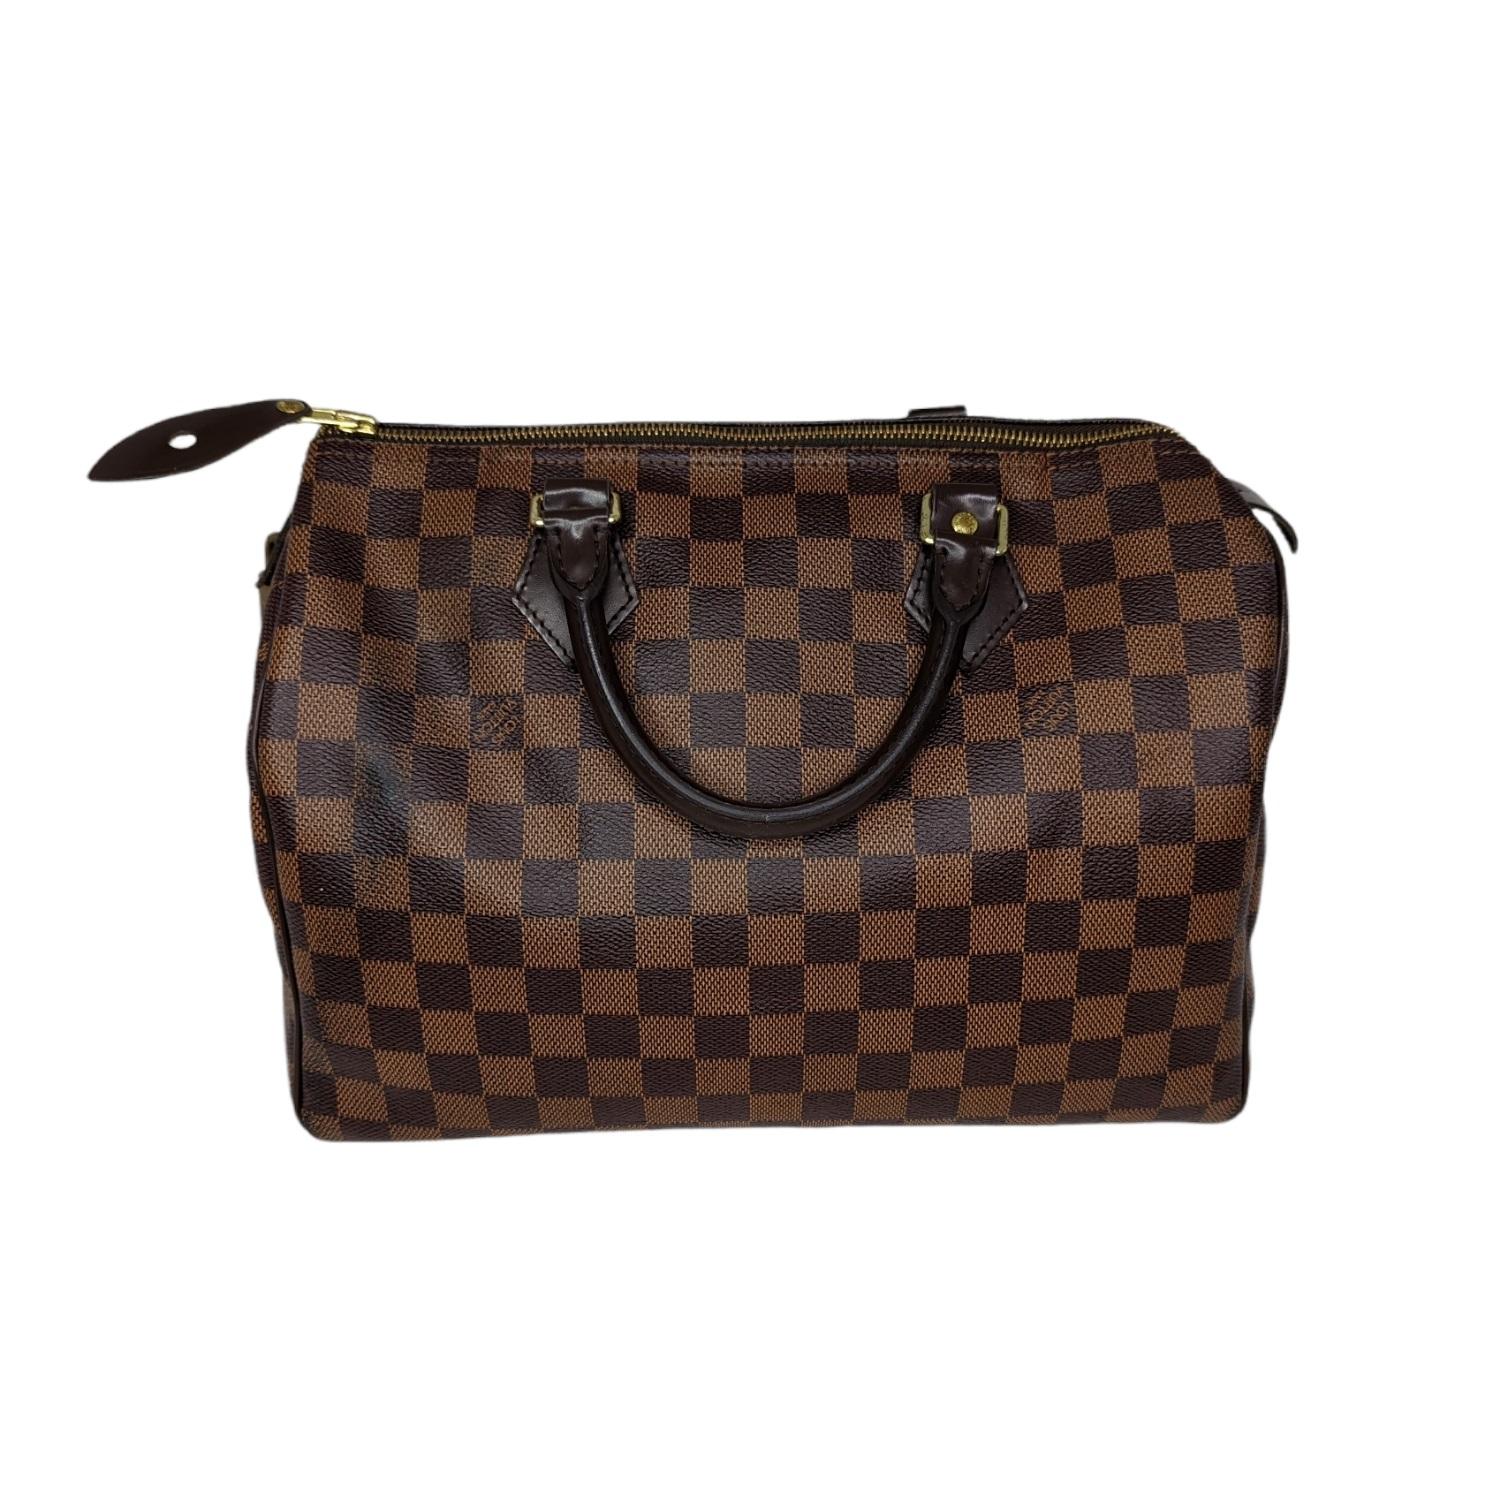 Crafted from graphic Damier Ebene canvas, the Speedy 30 is an elegant, compact handbag, a stylish companion for city life. Launched in 1930 as the 